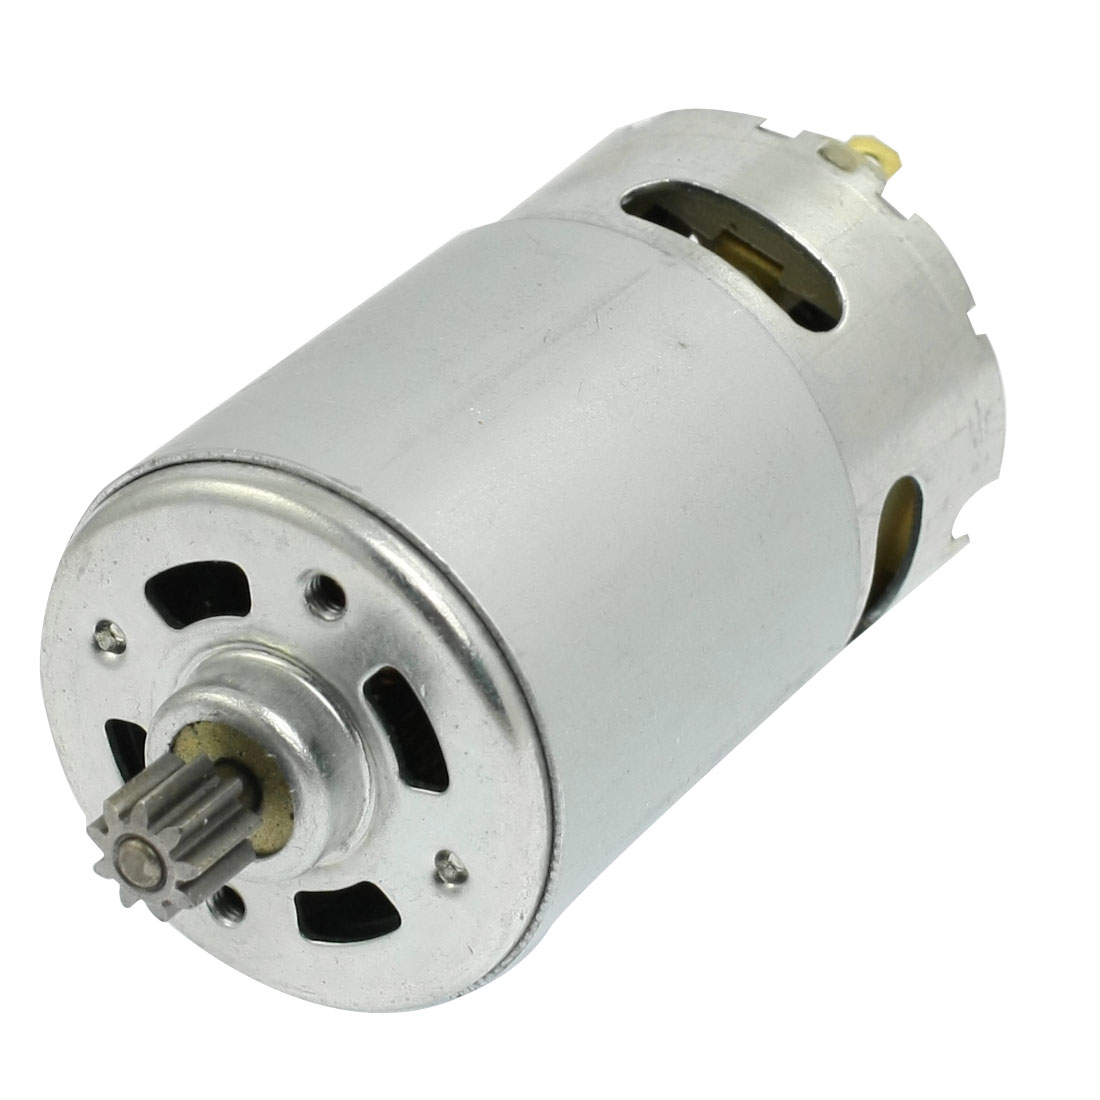 Unique Bargains Power Tool DC 9.6V 9 Toothed Shank Gear Motor for Rechargeable Electric Drill